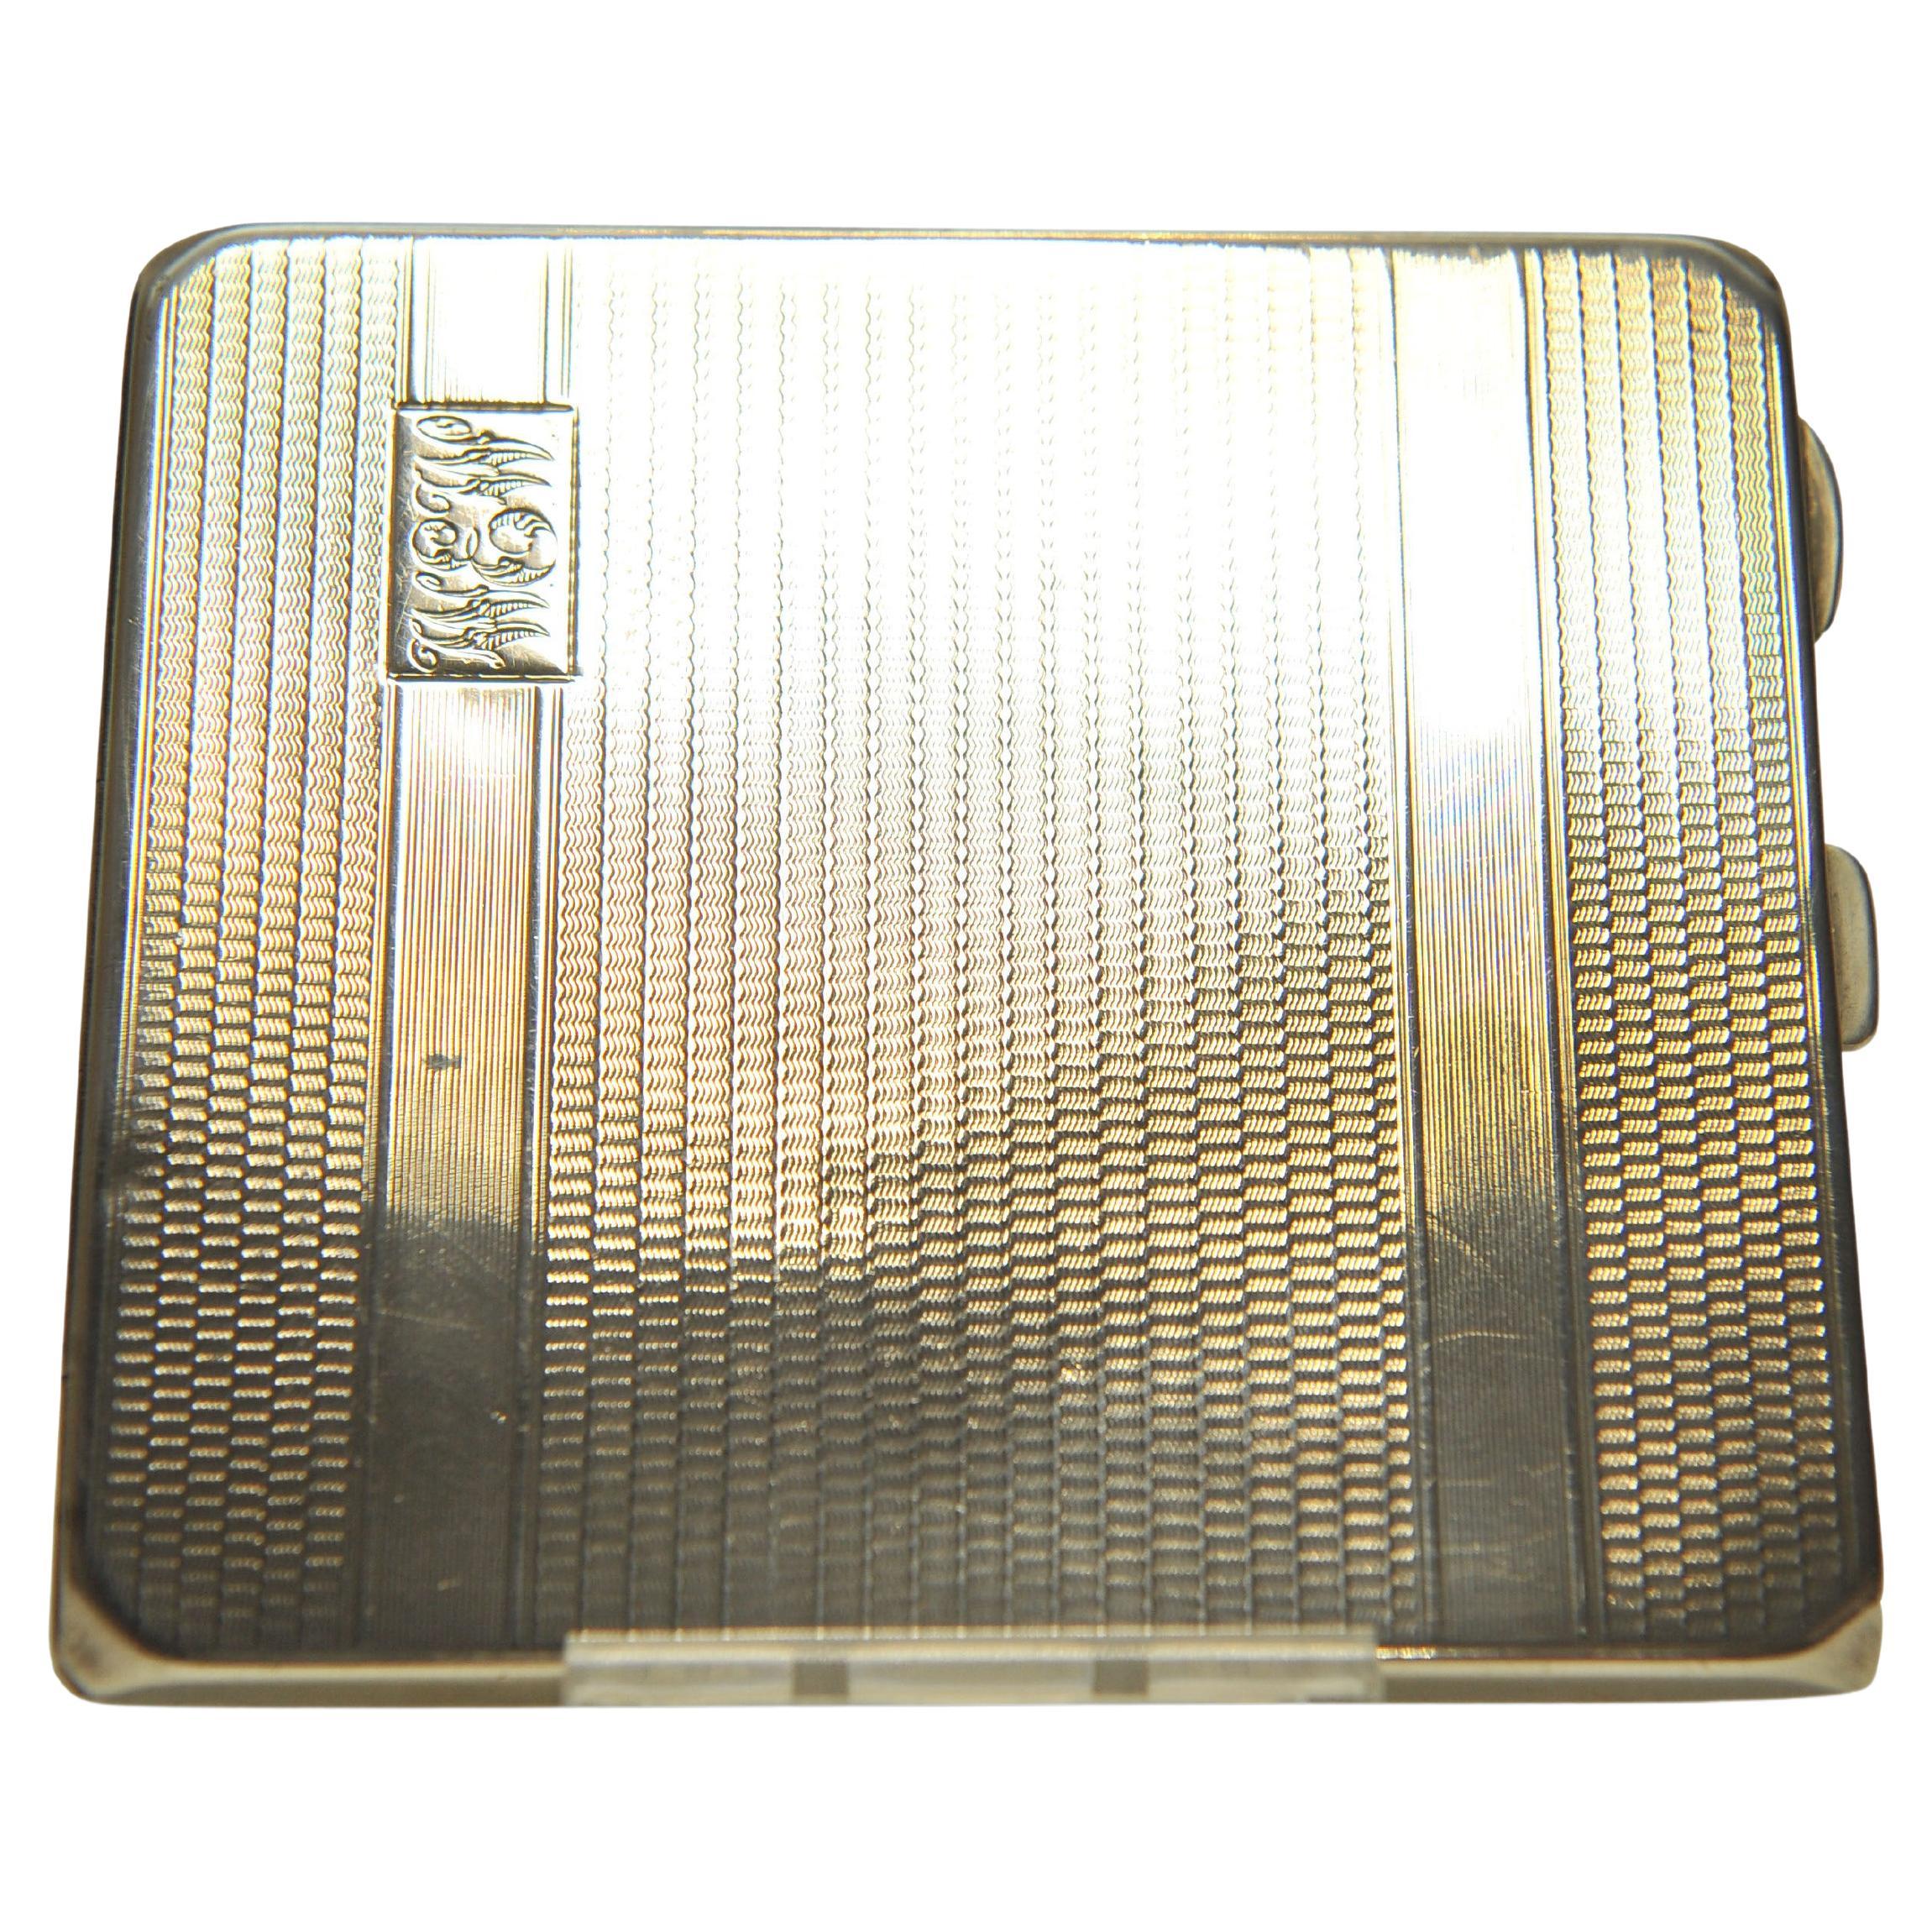 British Sterling Silver Art Deco Engraved Cigarette Case By Harman Bros. 1931 For Sale